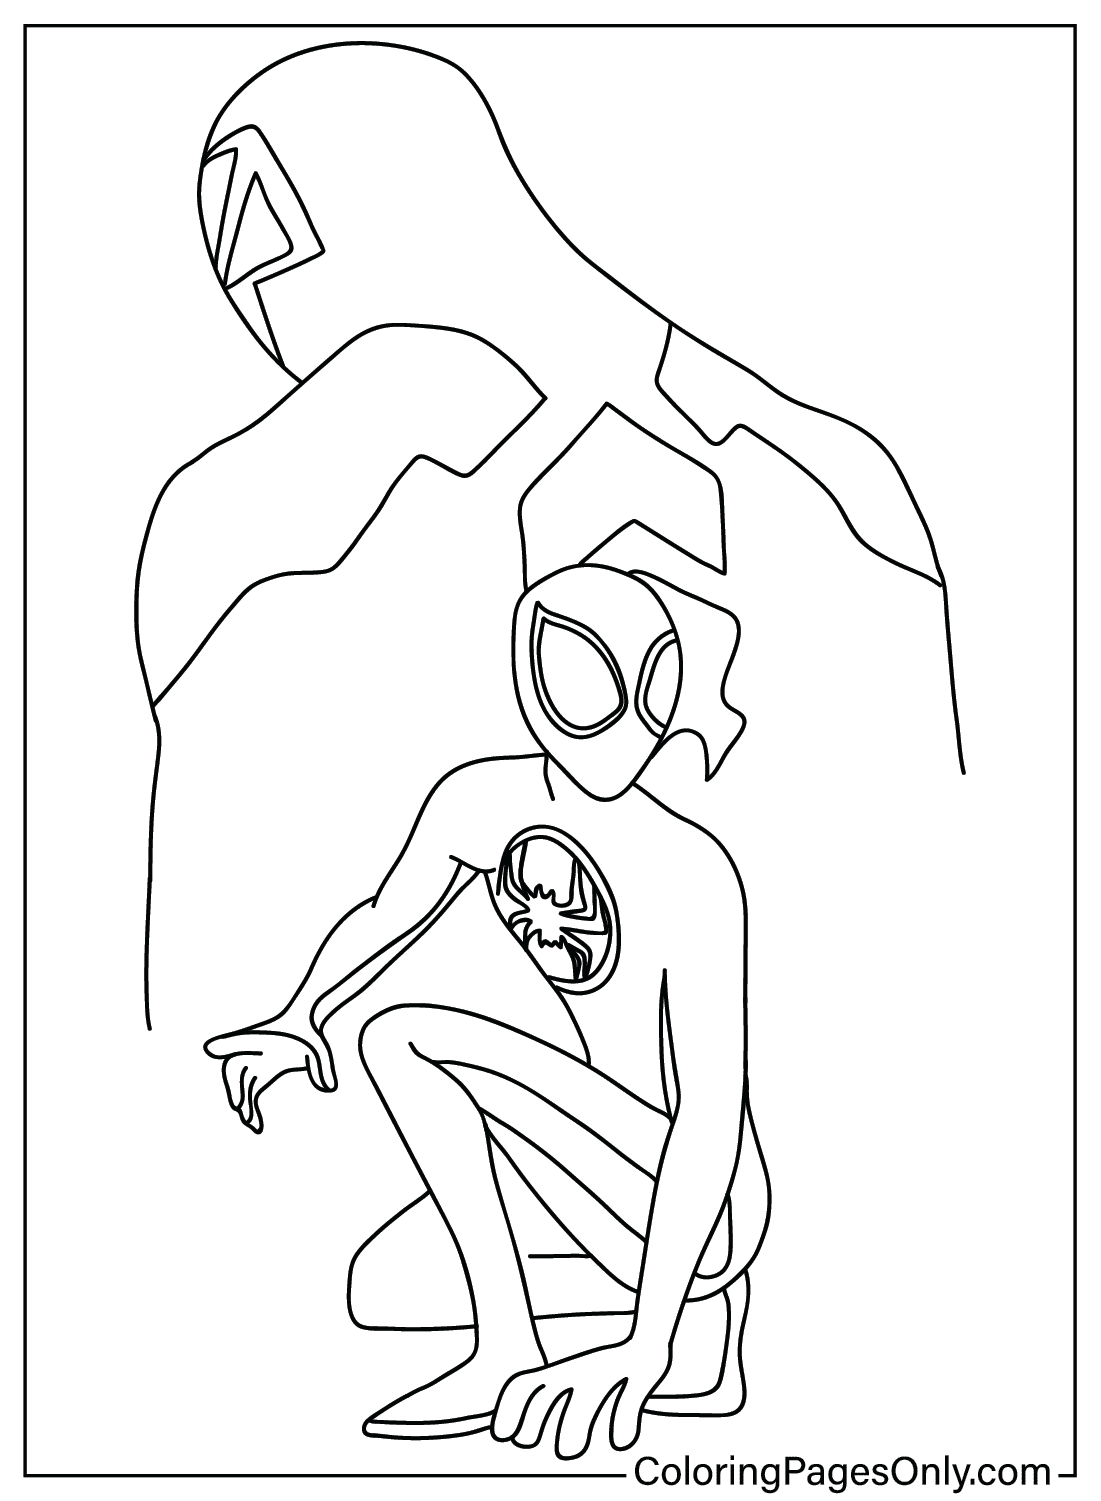 Spider-Man Across the Spider to Color